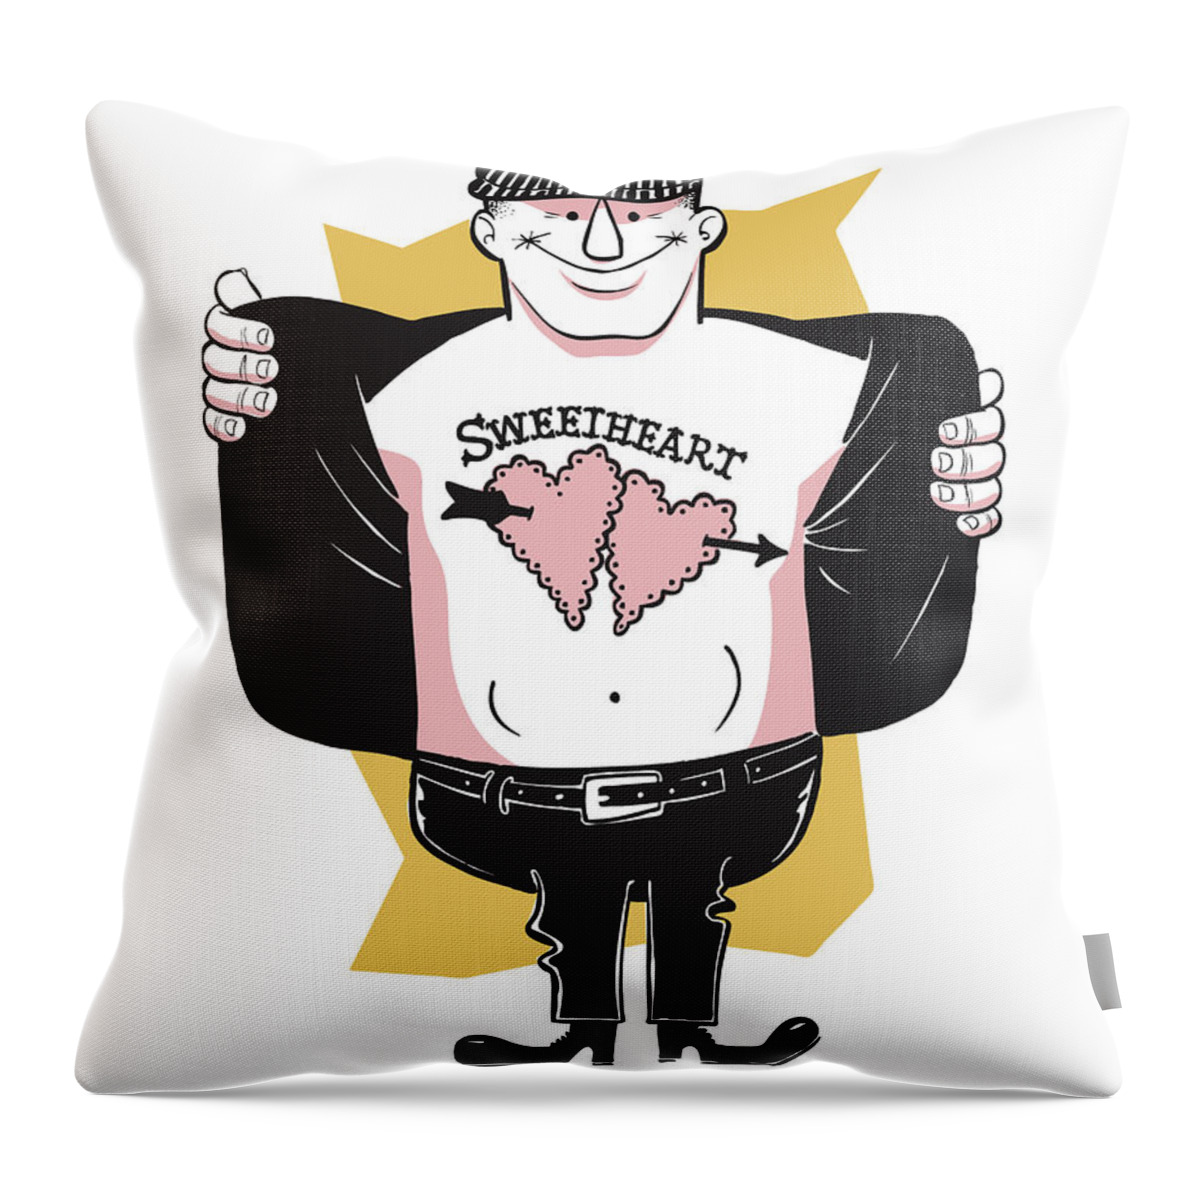 Admire Throw Pillow featuring the drawing Proud Shirtless Man with Sweetheart Tattoo #1 by CSA Images